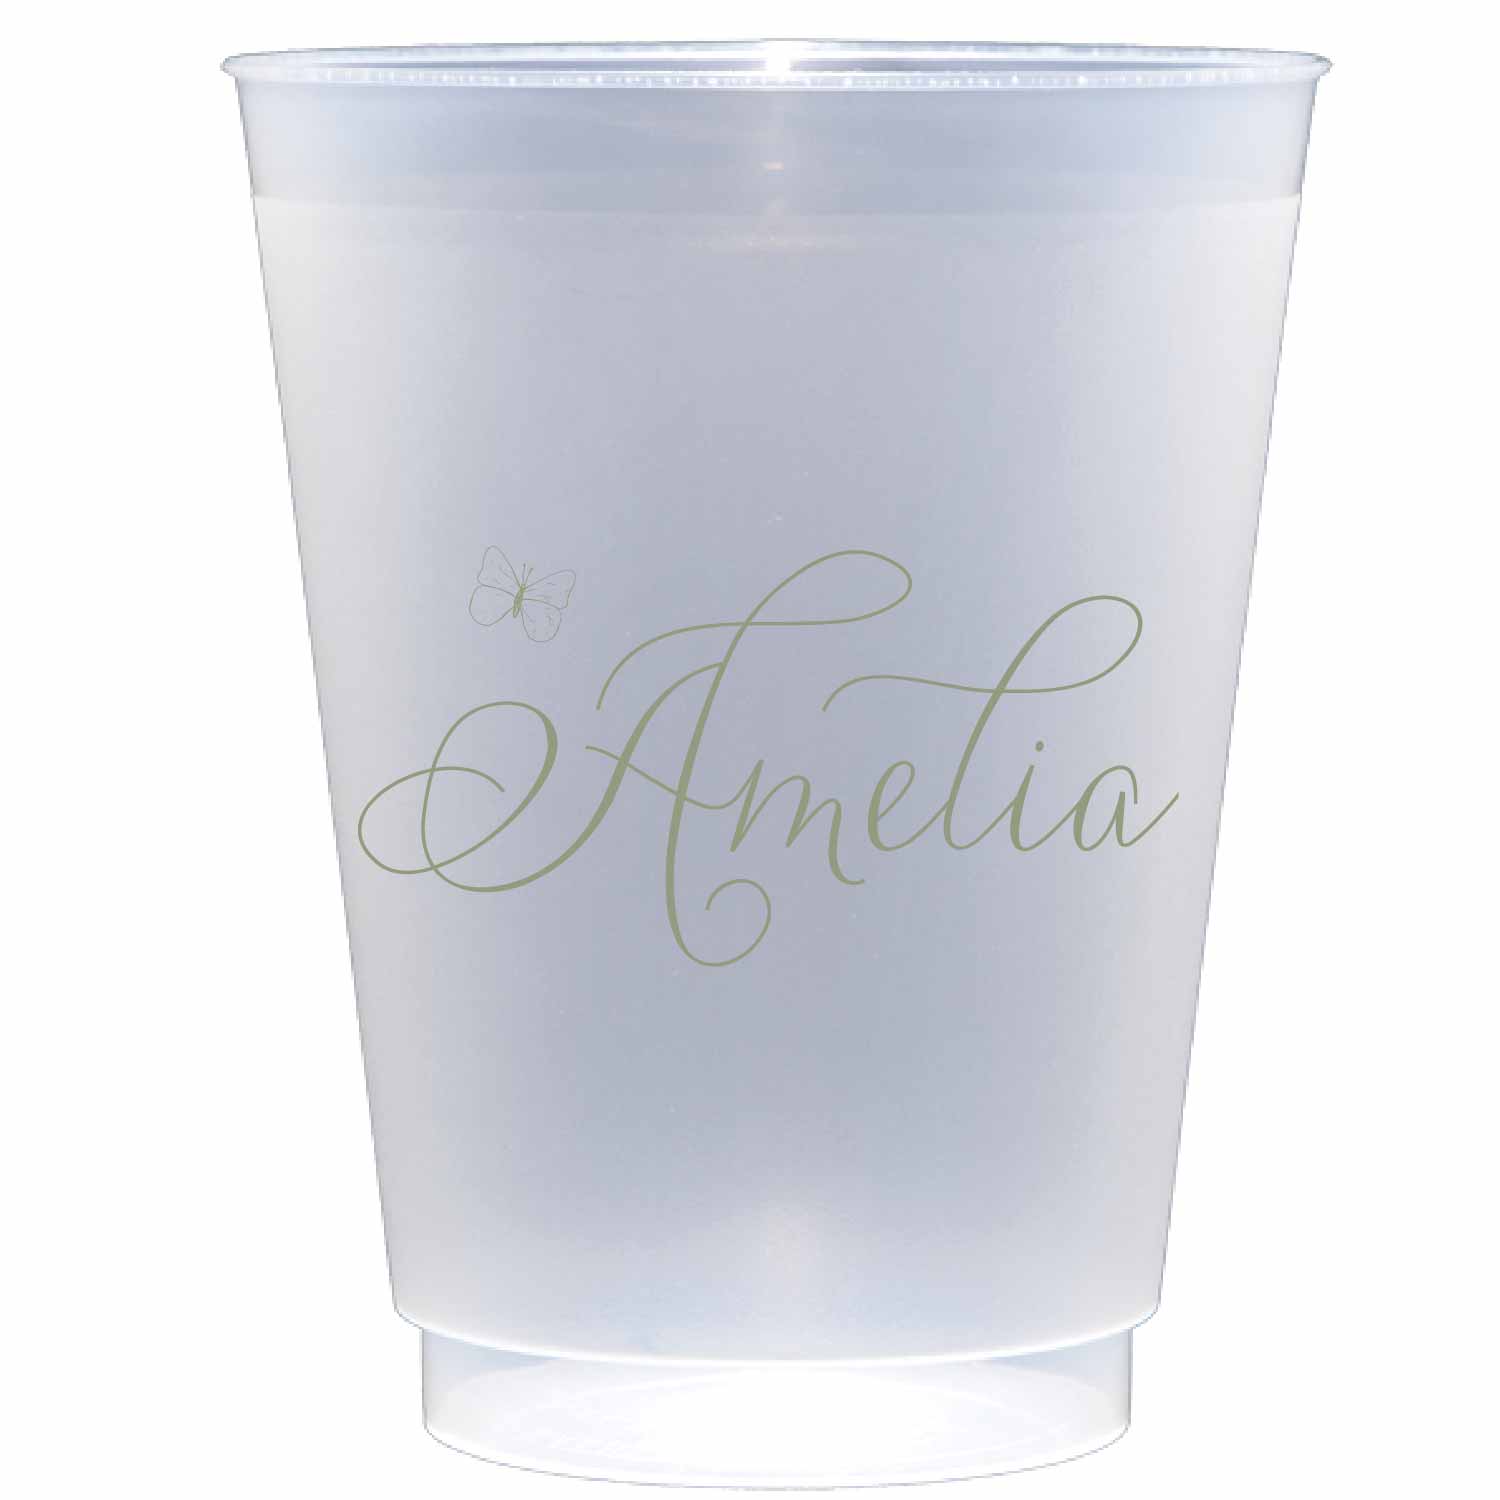 rosemary personalized flex cup